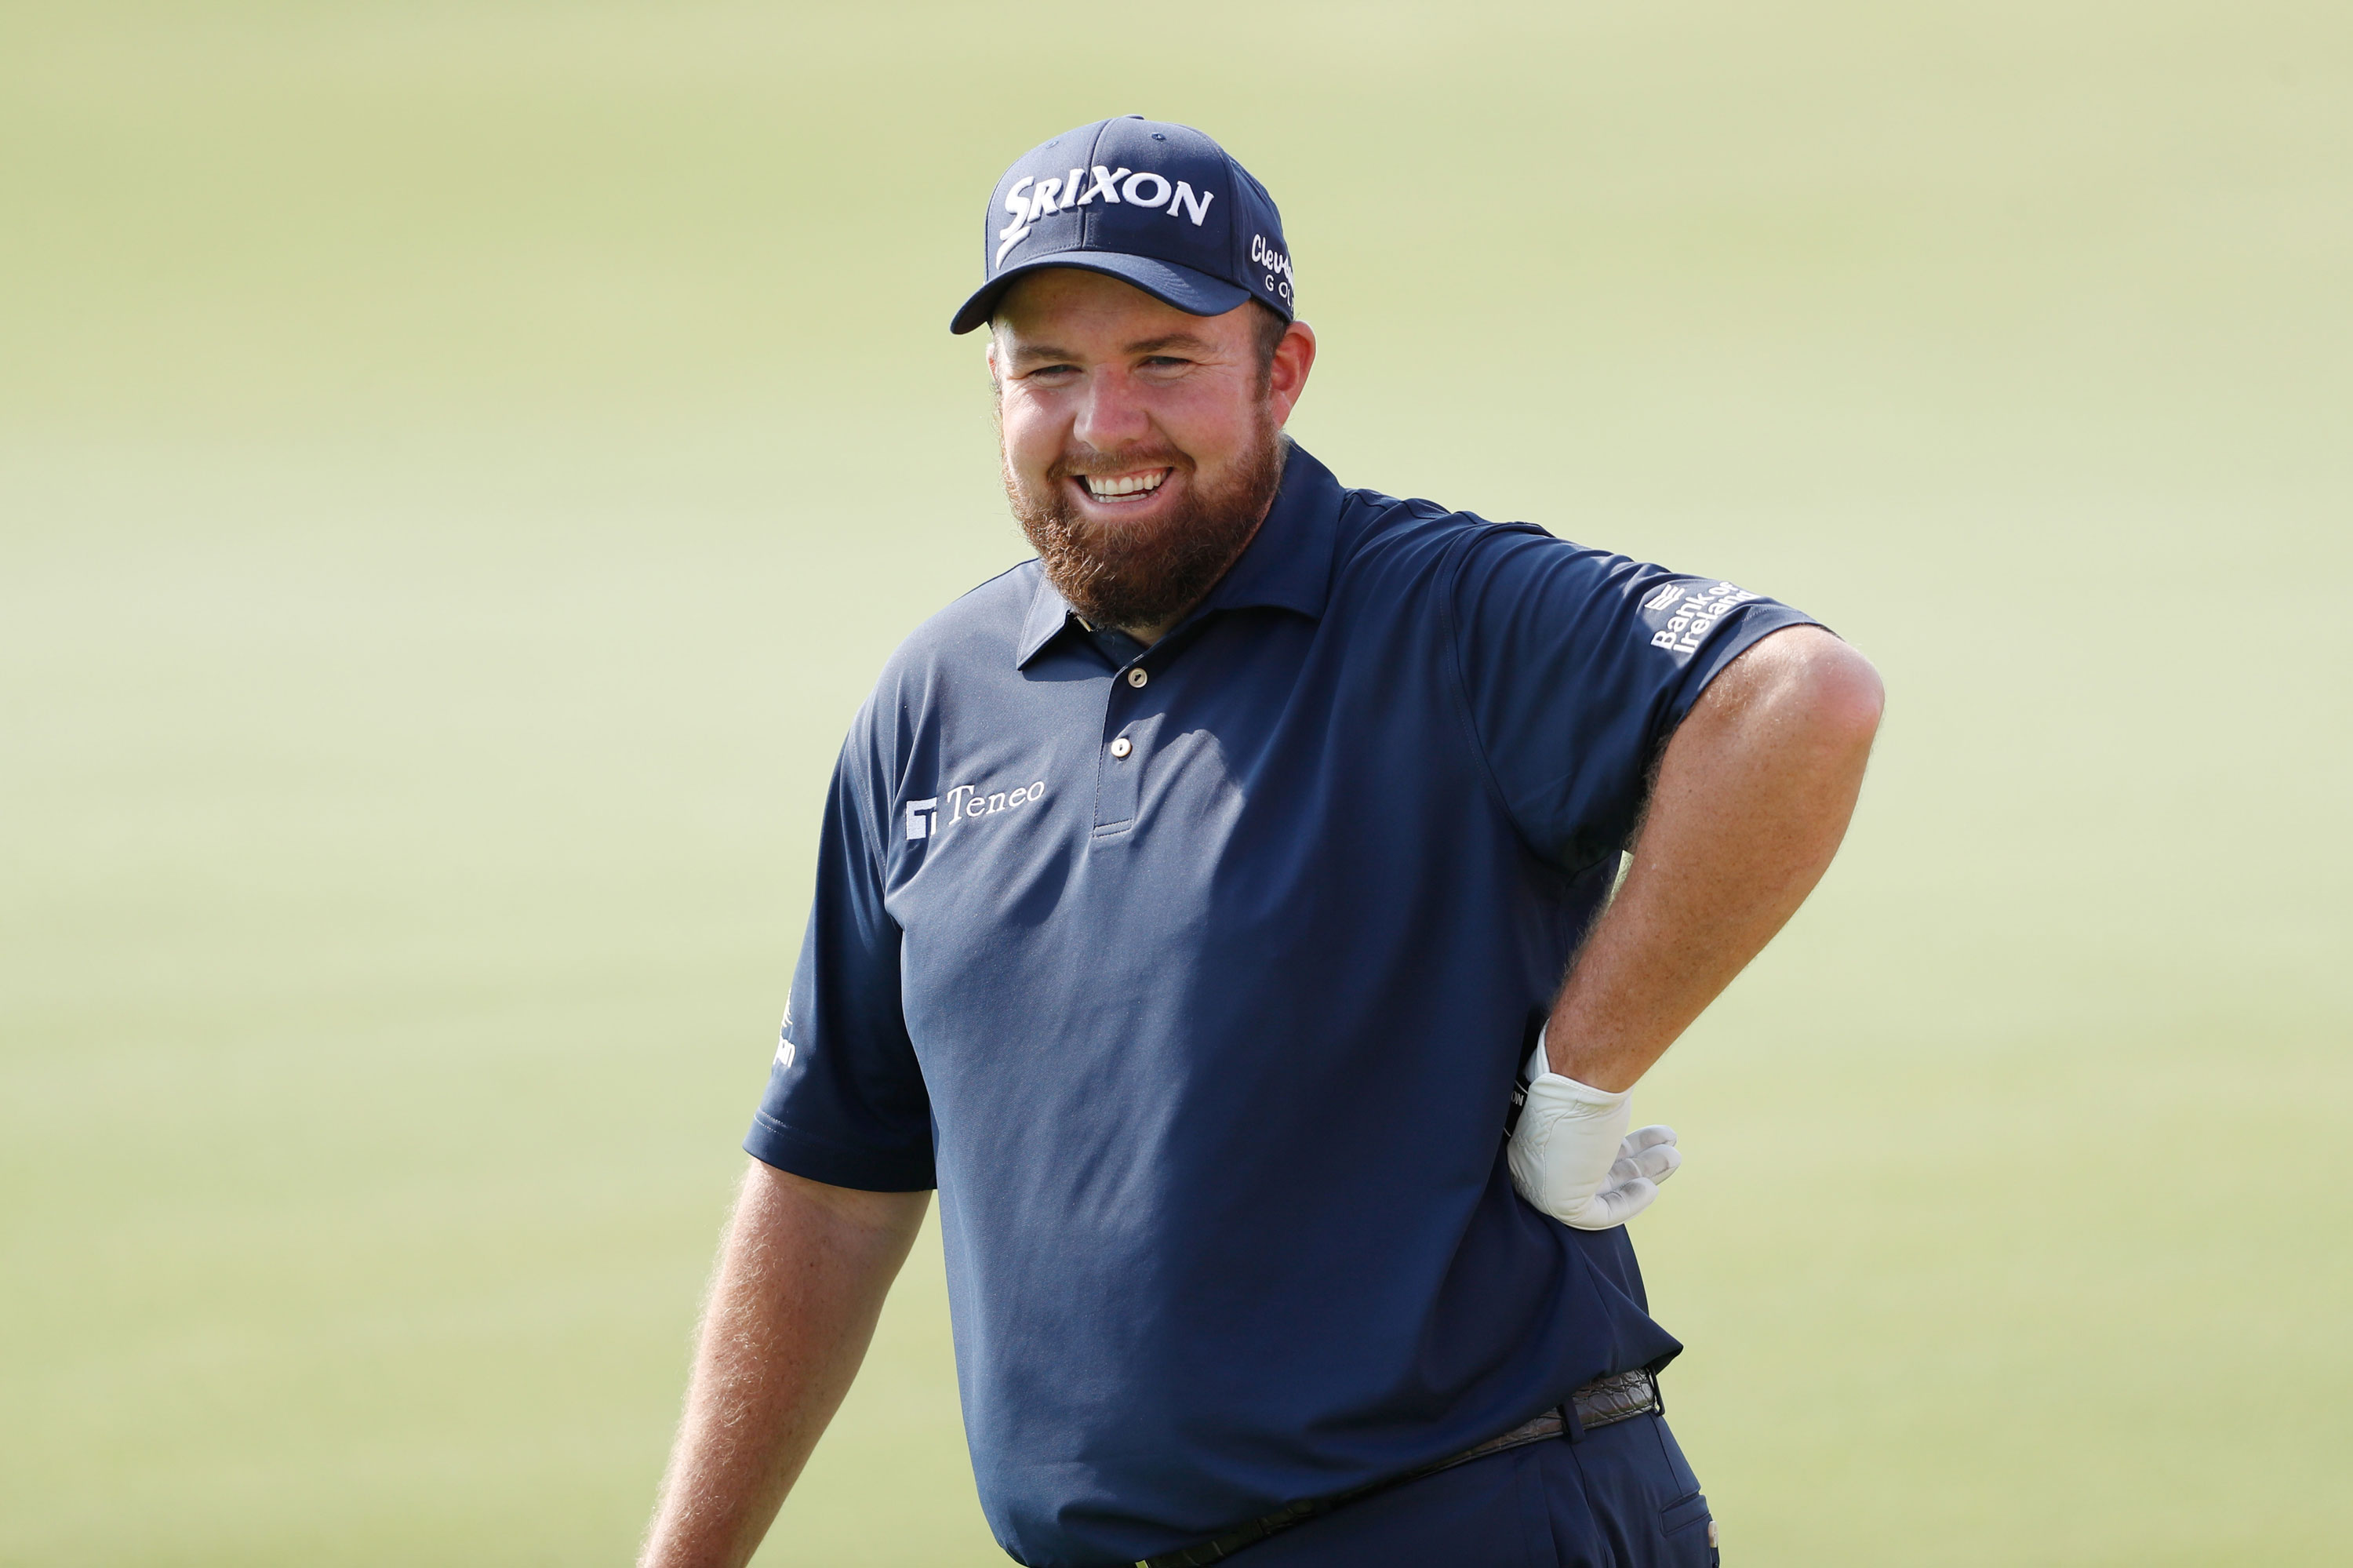 Shane Lowry says he suffered Ryder Cup blues after Whistling Straits drubbing I actually felt sick